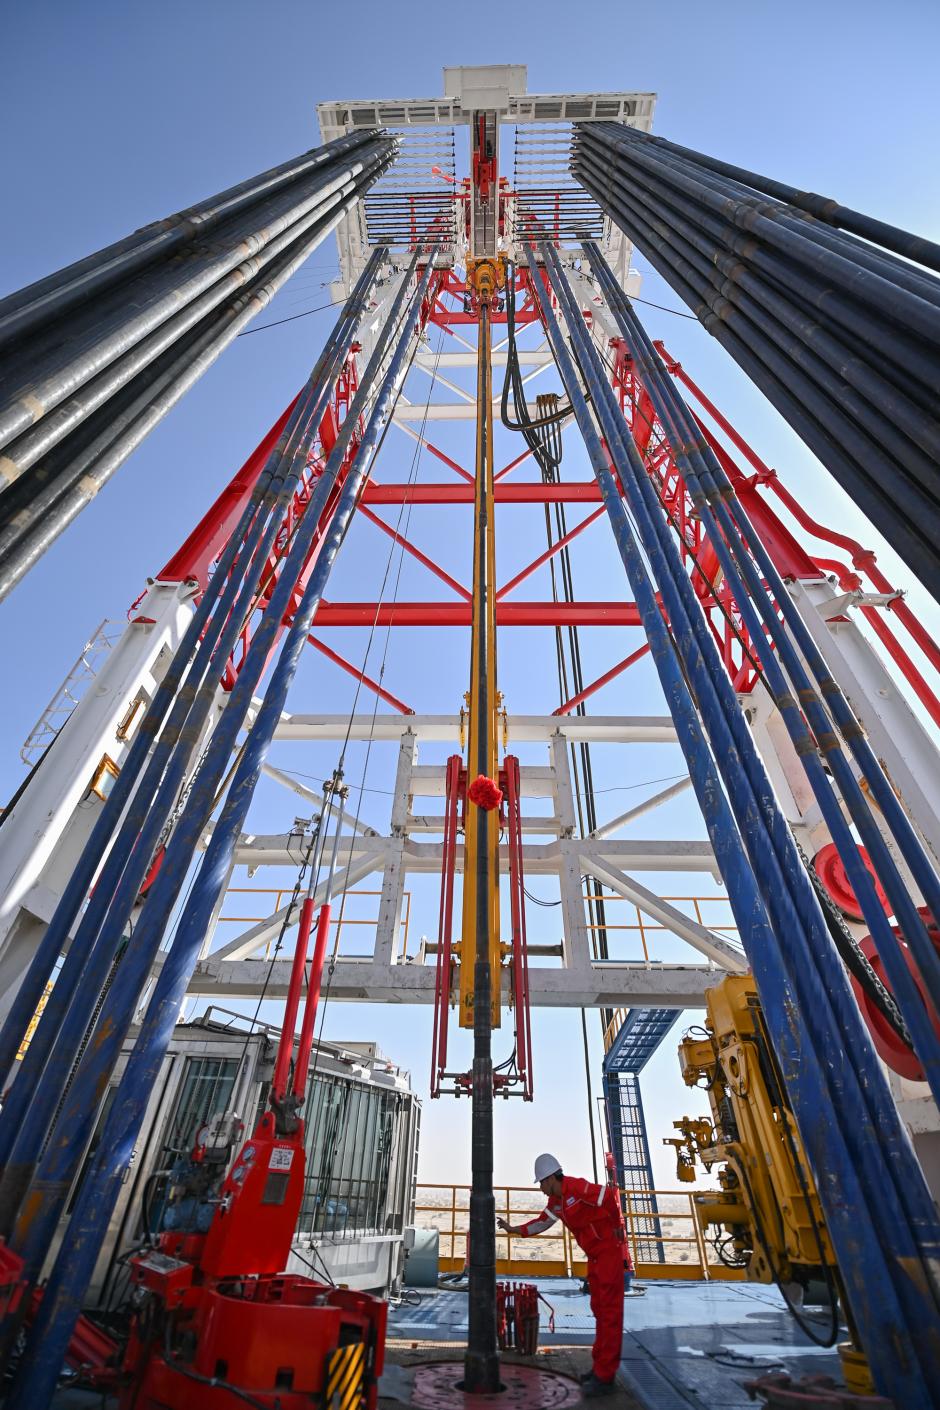 (230530) -- URUMQI, May 30, 2023 (Xinhua) -- This photo taken on May 30, 2023 shows the drilling project of a borehole over 10,000 meters deep for scientific exploration in northwest China's Xinjiang Uygur Autonomous Region.
  The drilling of China's first borehole over 10,000 meters deep for scientific exploration began on Tuesday in the Tarim Basin, northwest China's Xinjiang Uygur Autonomous Region.
   The operation started at 11:46 a.m. on Tuesday. It represents a landmark in China's deep-Earth exploration, providing an unprecedented opportunity to study areas of the planet deep beneath the surface. (Xinhua/Li Xiang) (Photo by Li Xiang / XINHUA / Xinhua via AFP)